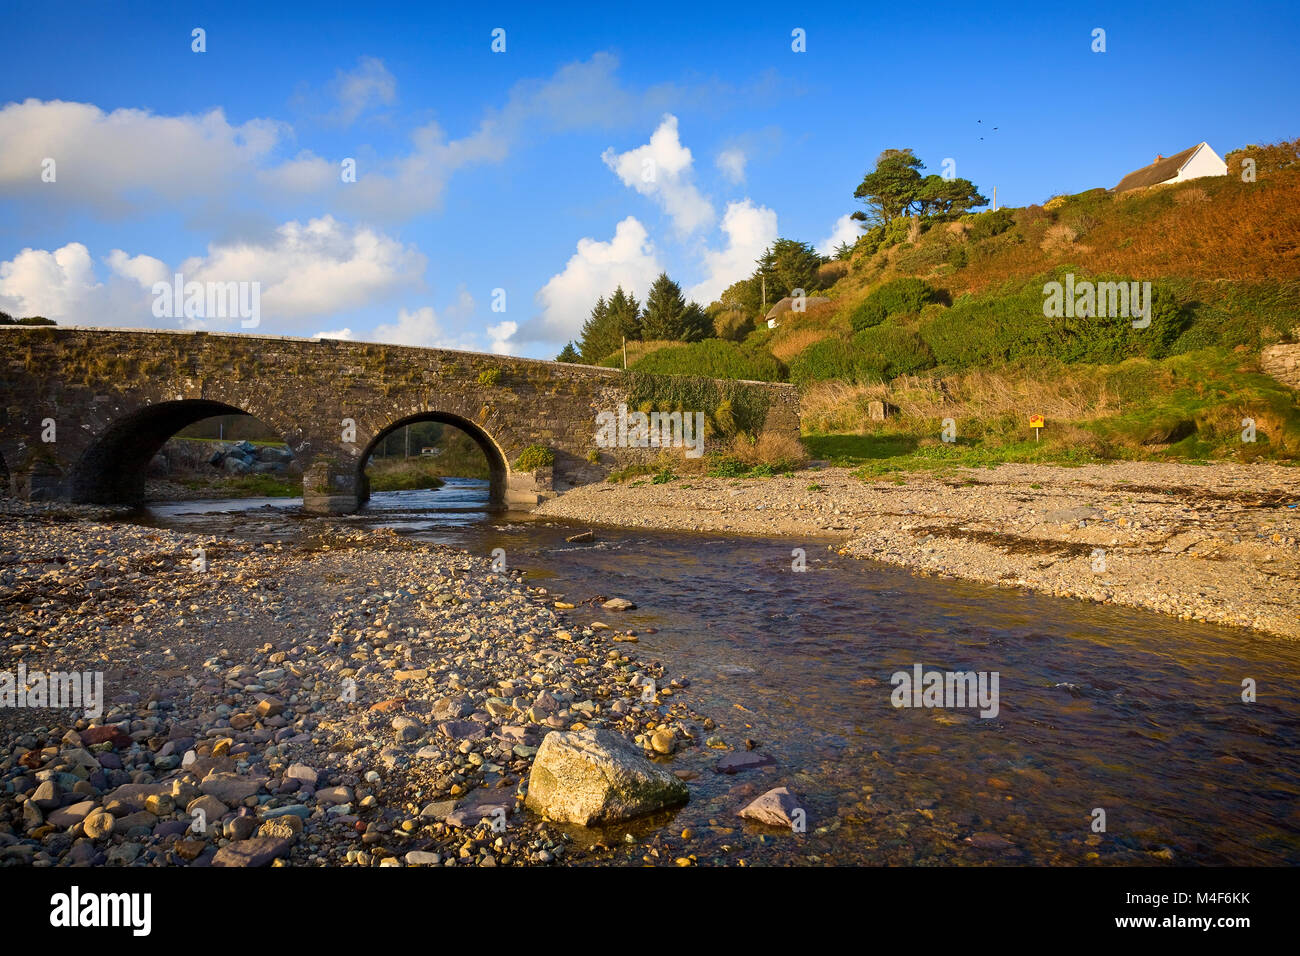 Bridge over The River Dalligan at Ballyvoyle, East of Dungarvan, County Waterford, Ireland Stock Photo